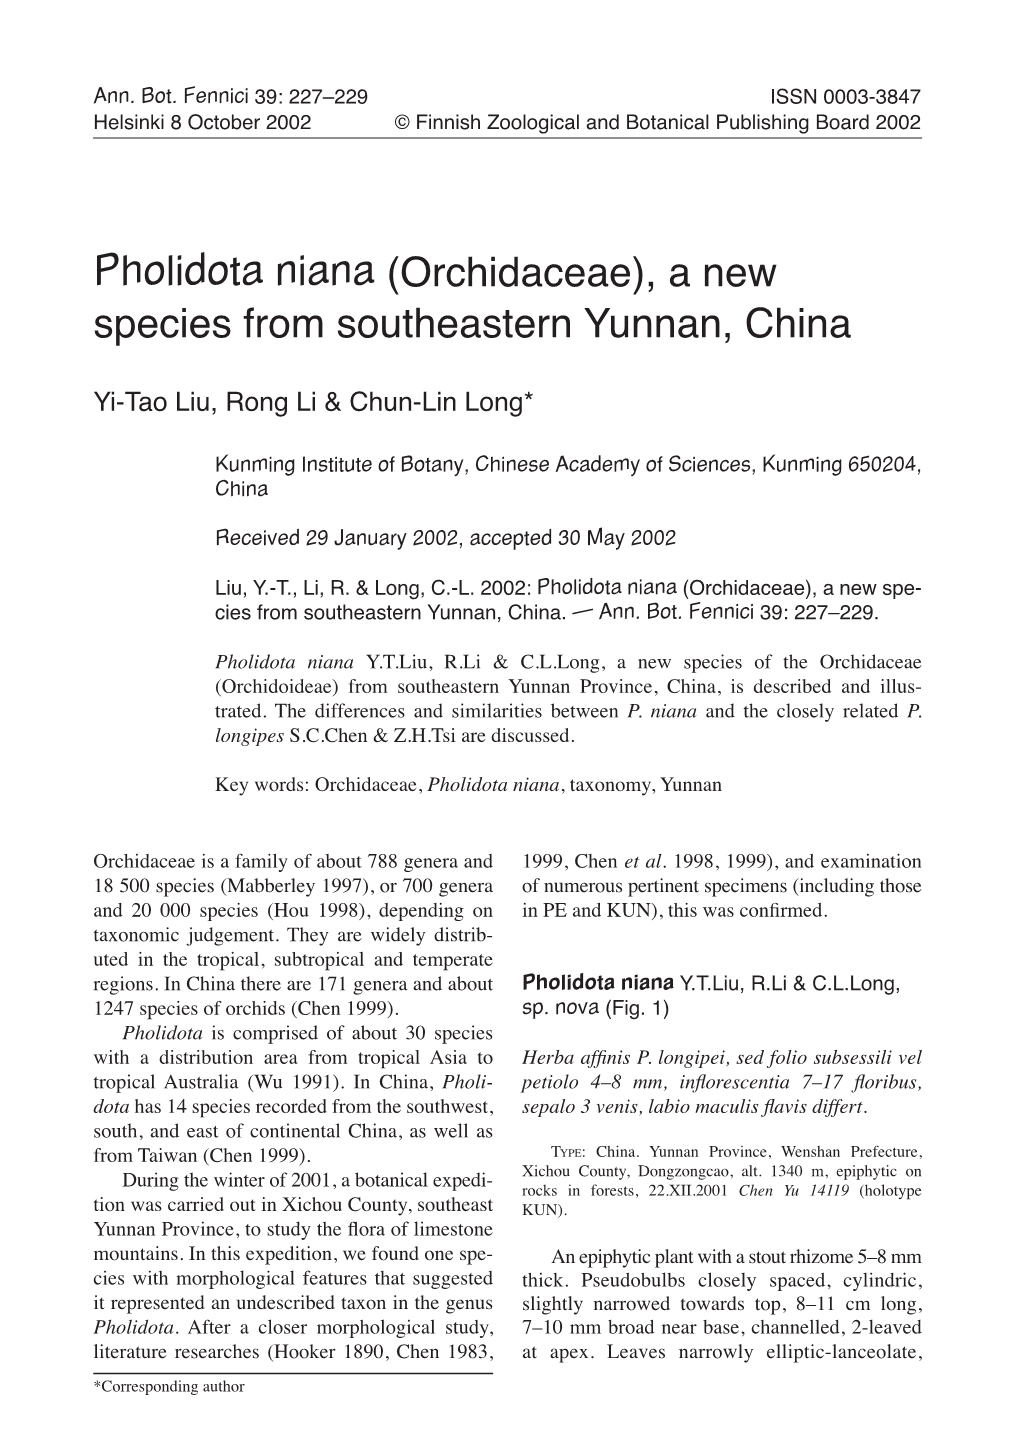 Pholidota Niana (Orchidaceae), a New Species from Southeastern Yunnan, China